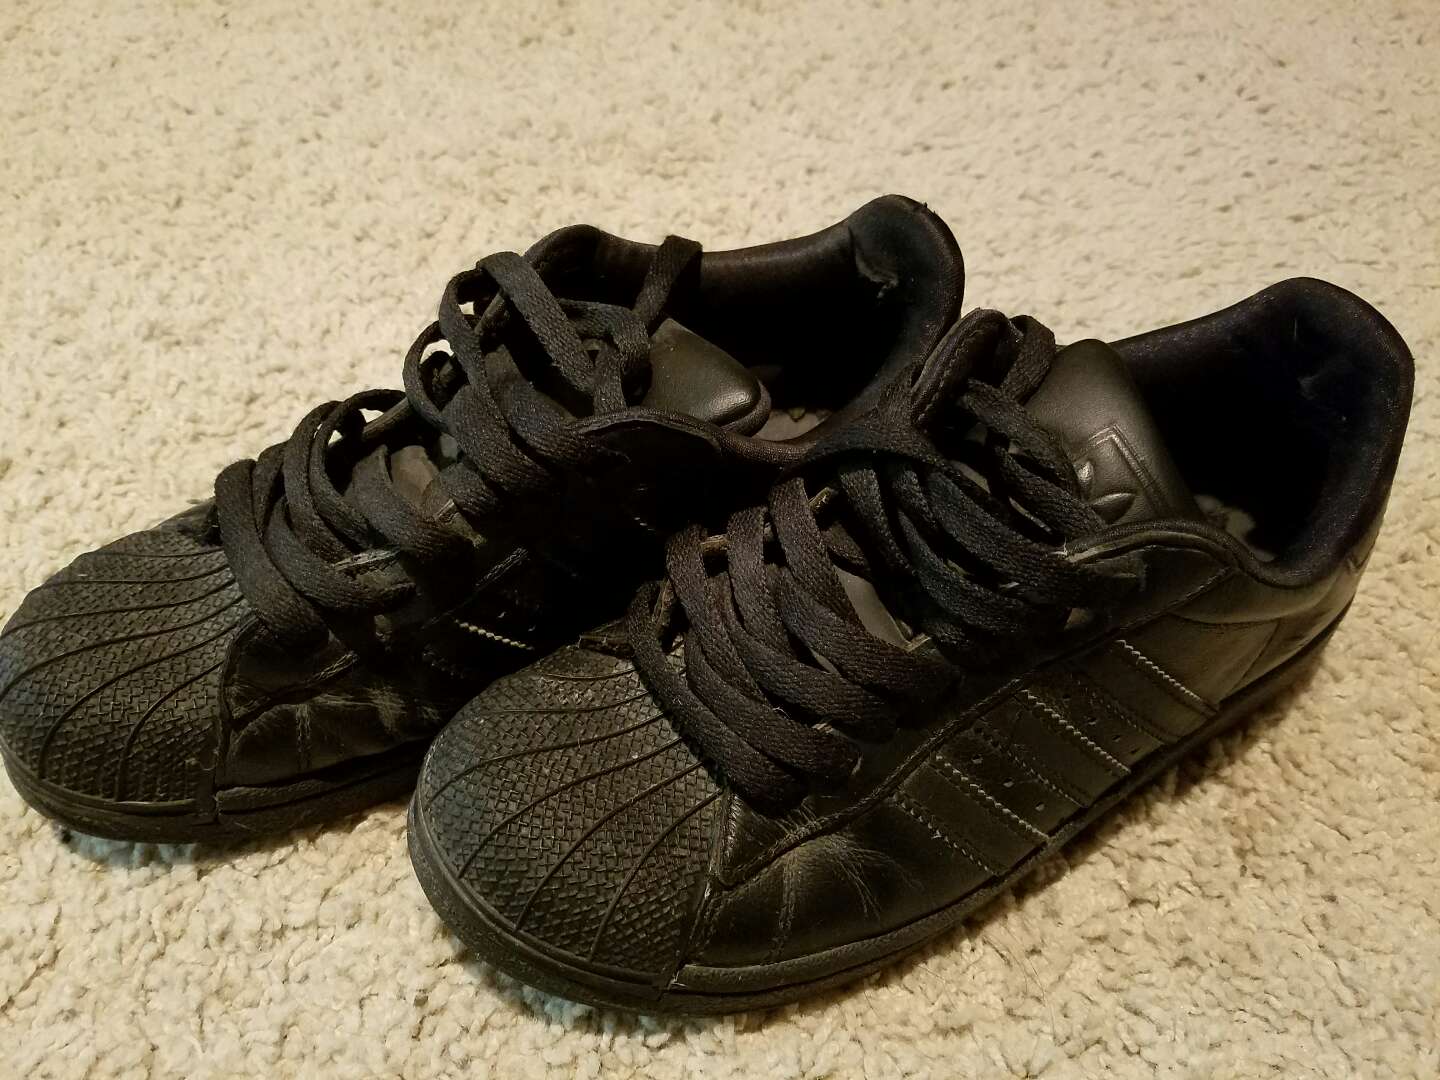 All black shell toe Adidas for sale in Victorville, CA - 5miles: Buy ...